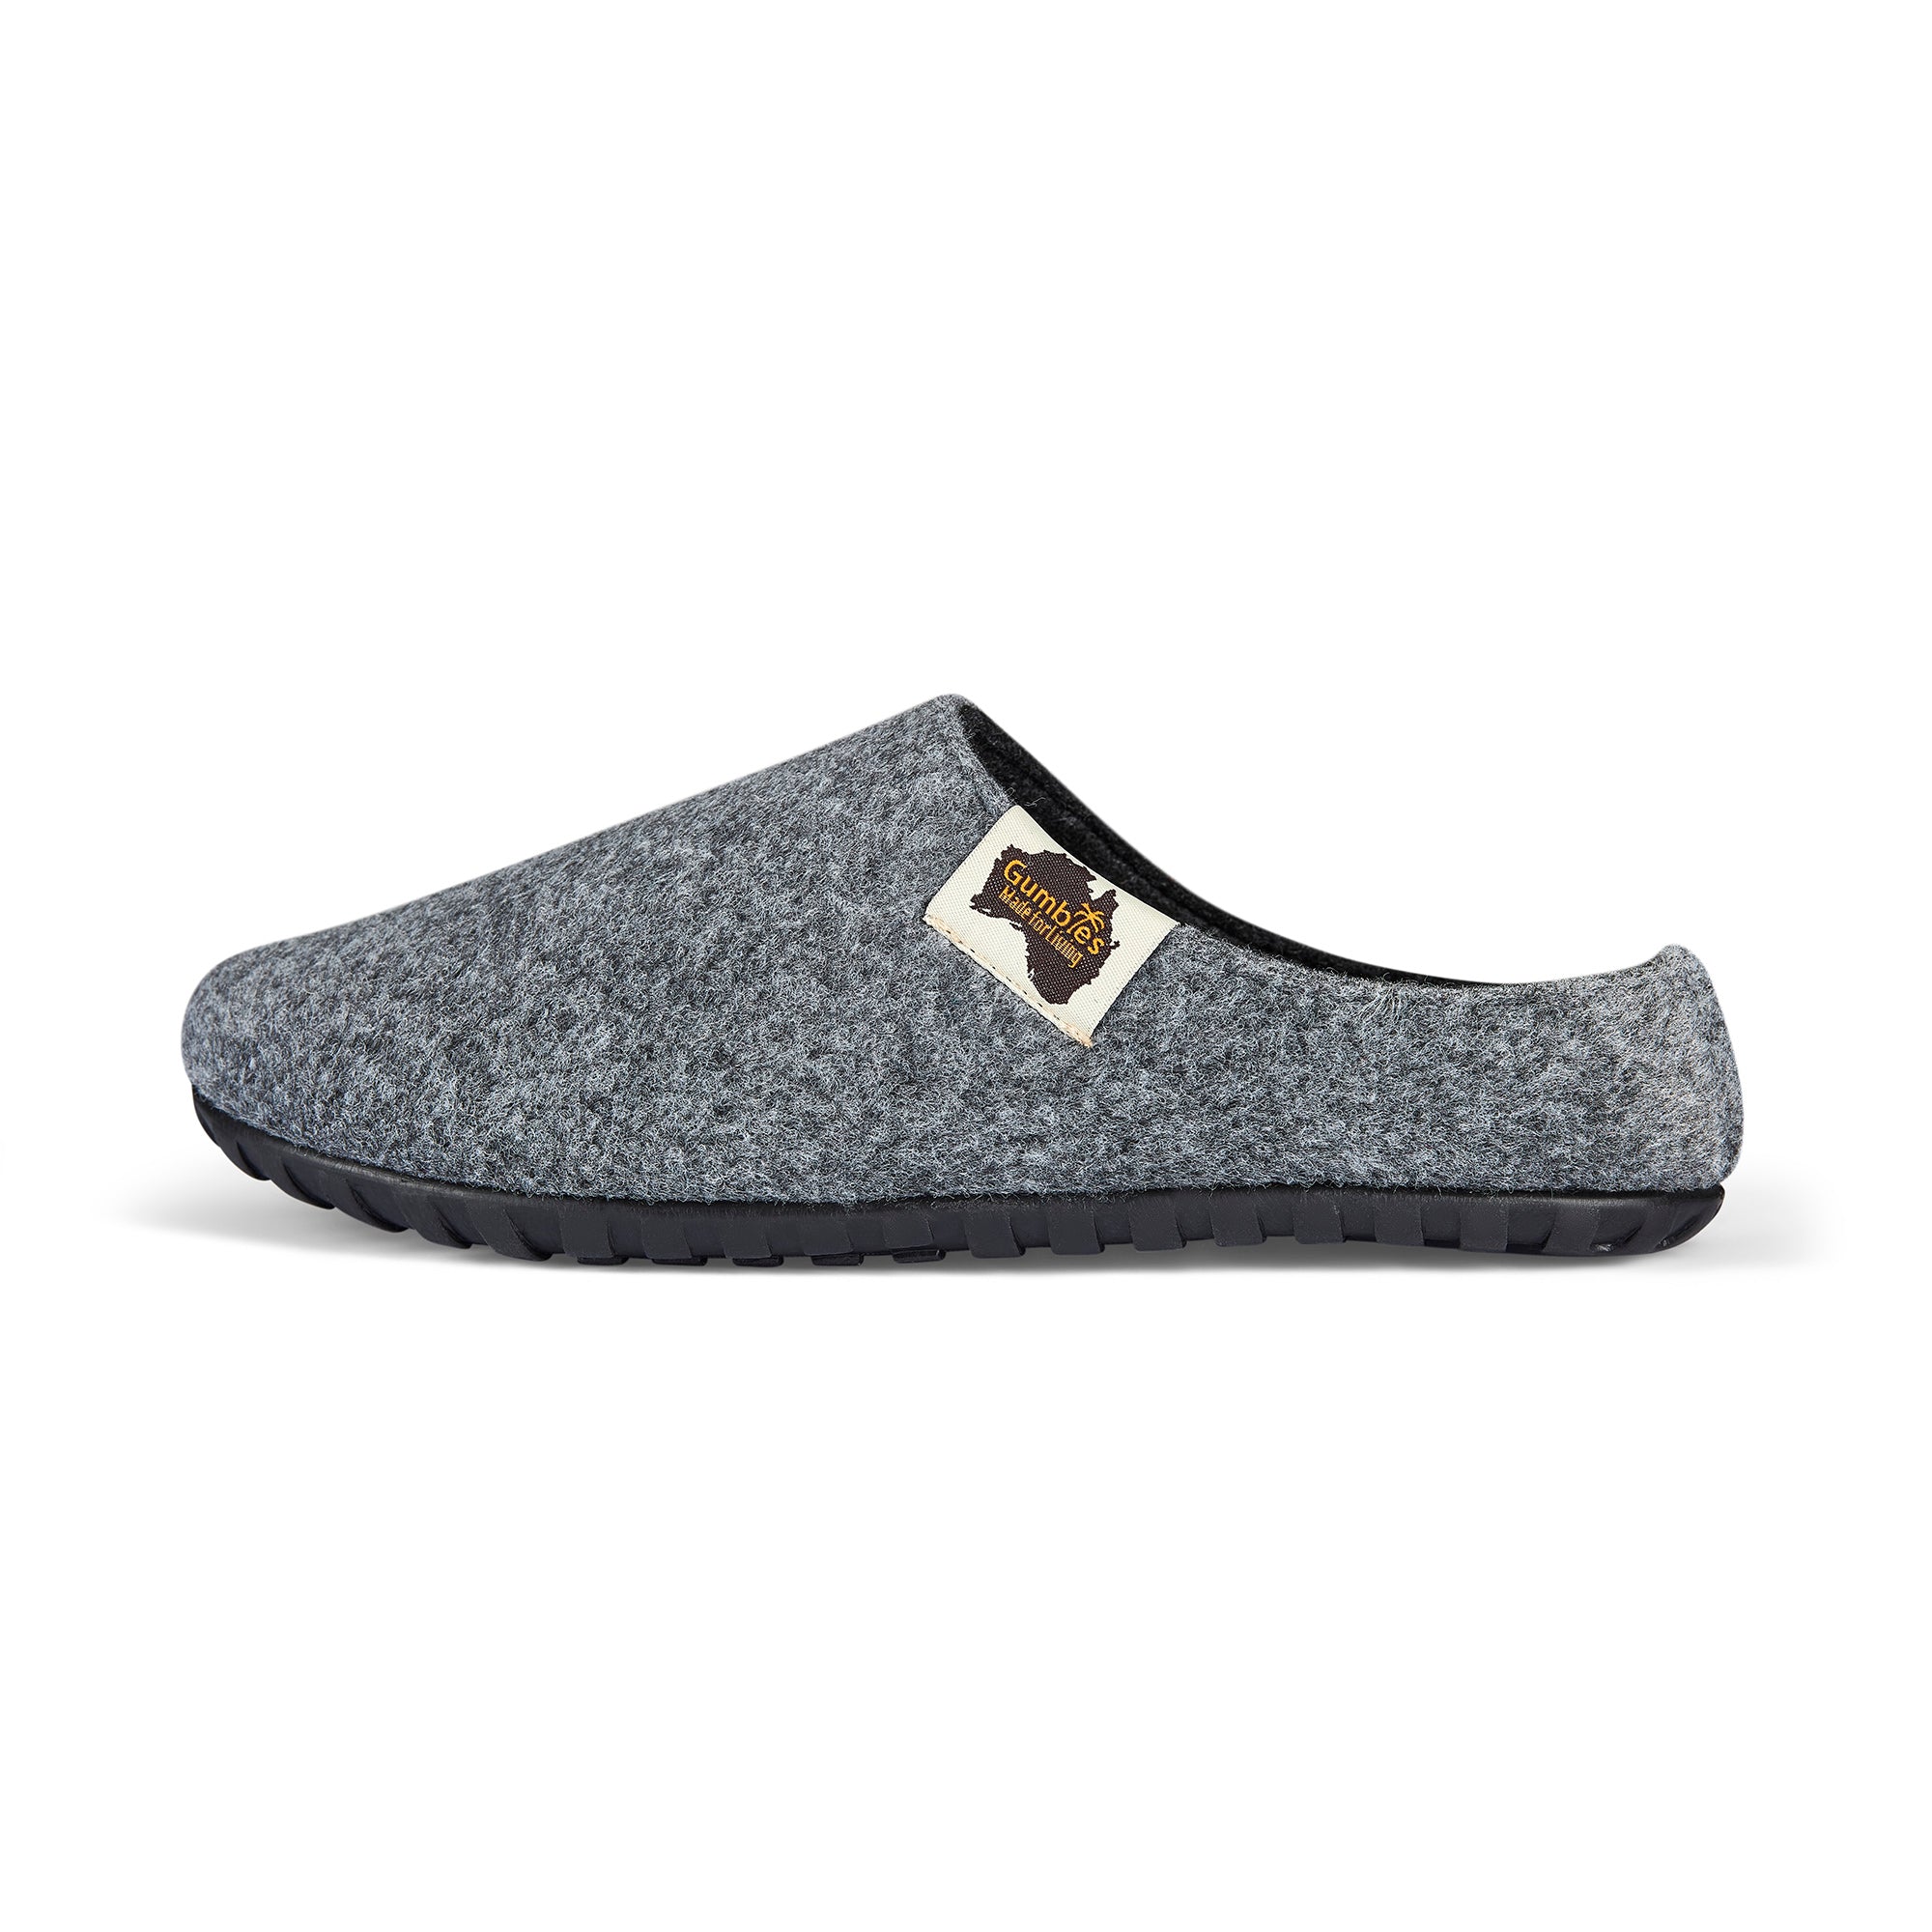 Outback - Men's - Grey & Charcoal